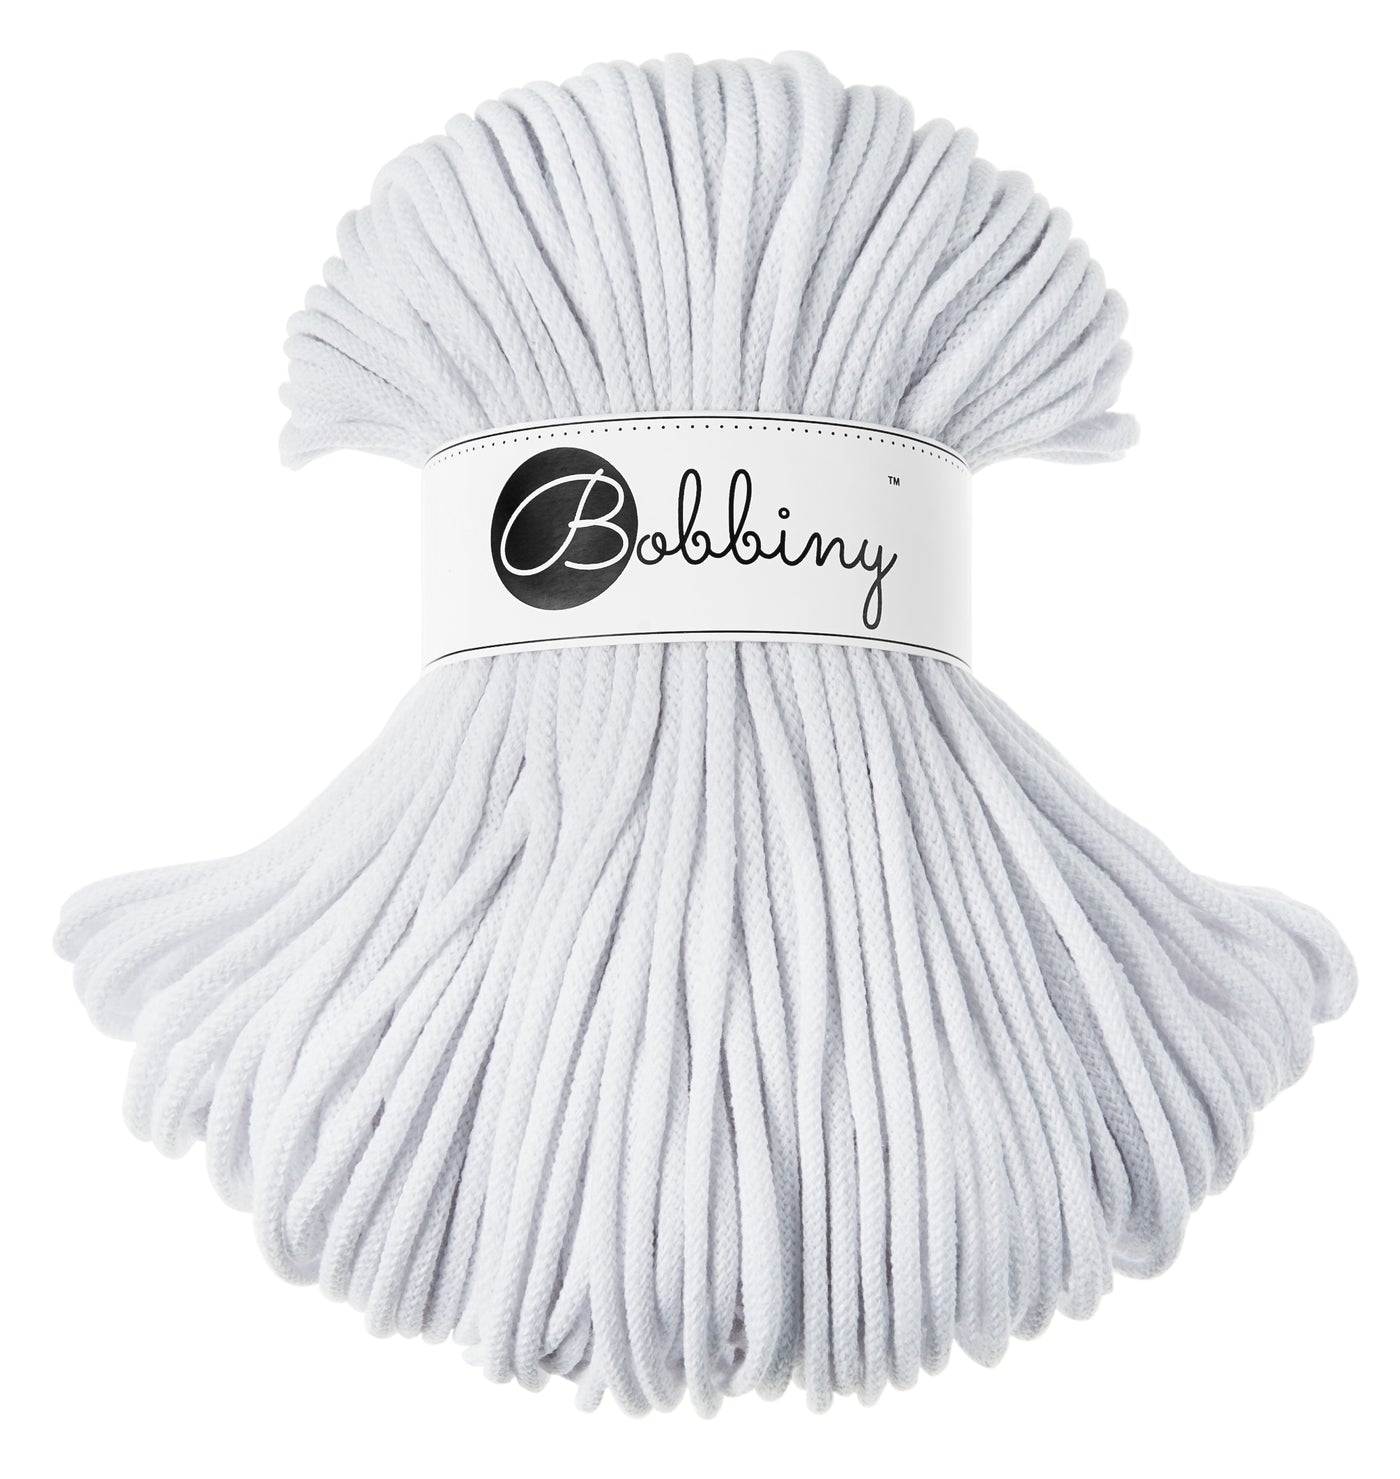 These beautiful Bobbiny cords are made in Poland from 100% recycled cottons and are non-toxic, certified safe for children and meet certified worldwide textile standards.  5mm Diameter  100 metres Length  Recommended for use with 10-12mm crochet or knitting needles  Cotton inner and outer layers, perfect for use with Macrame, Crochet or Knitting